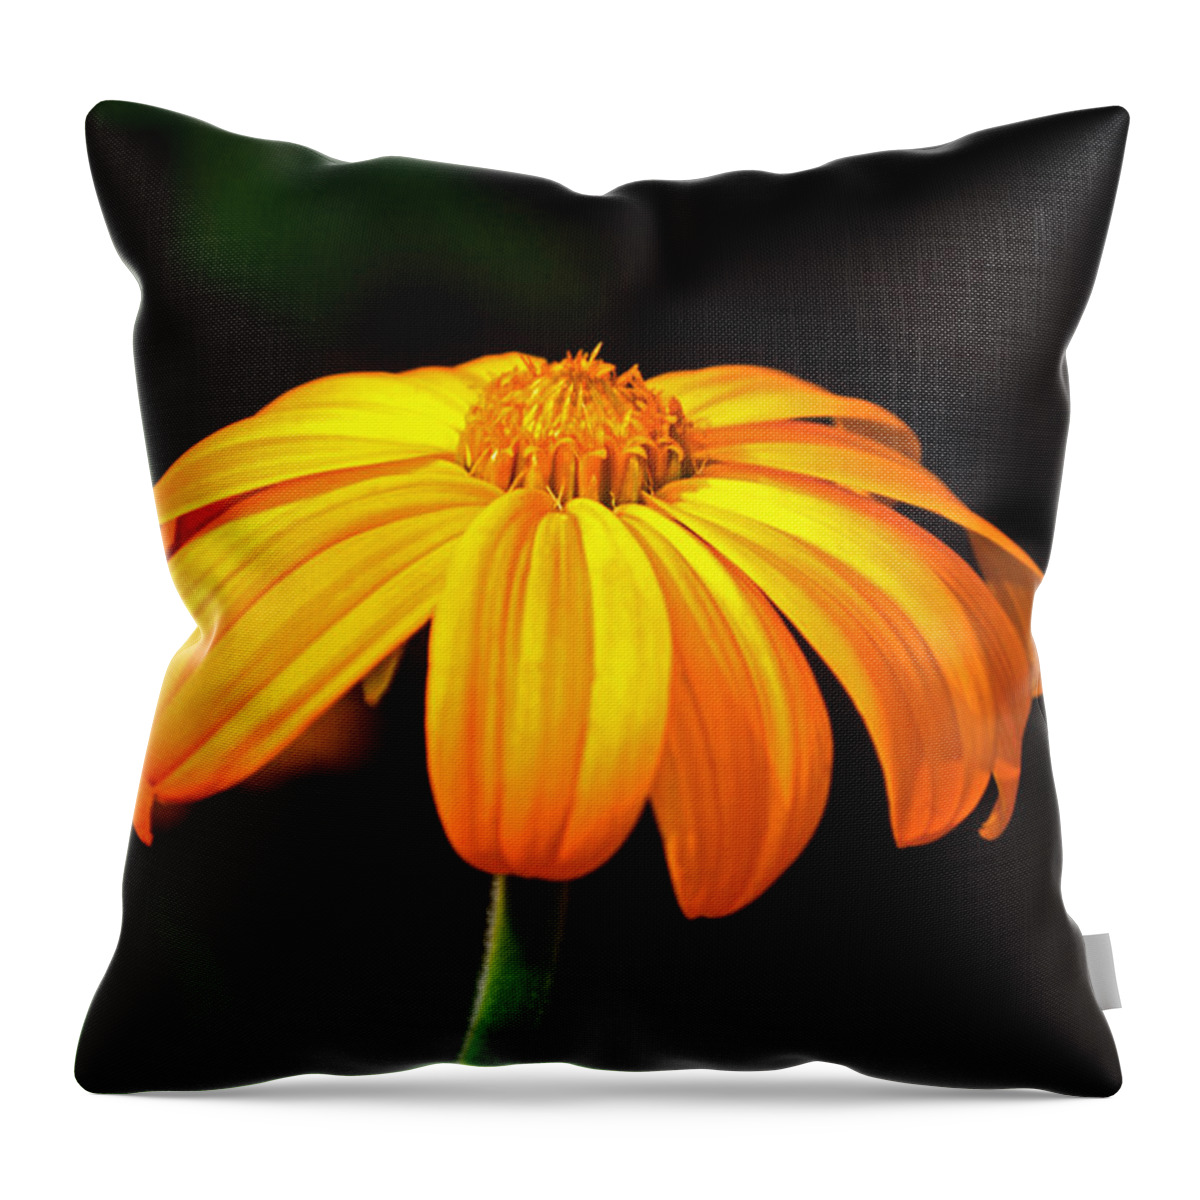 Yellow Throw Pillow featuring the photograph Colors Of Nature - Yellow Flower 020 by George Bostian